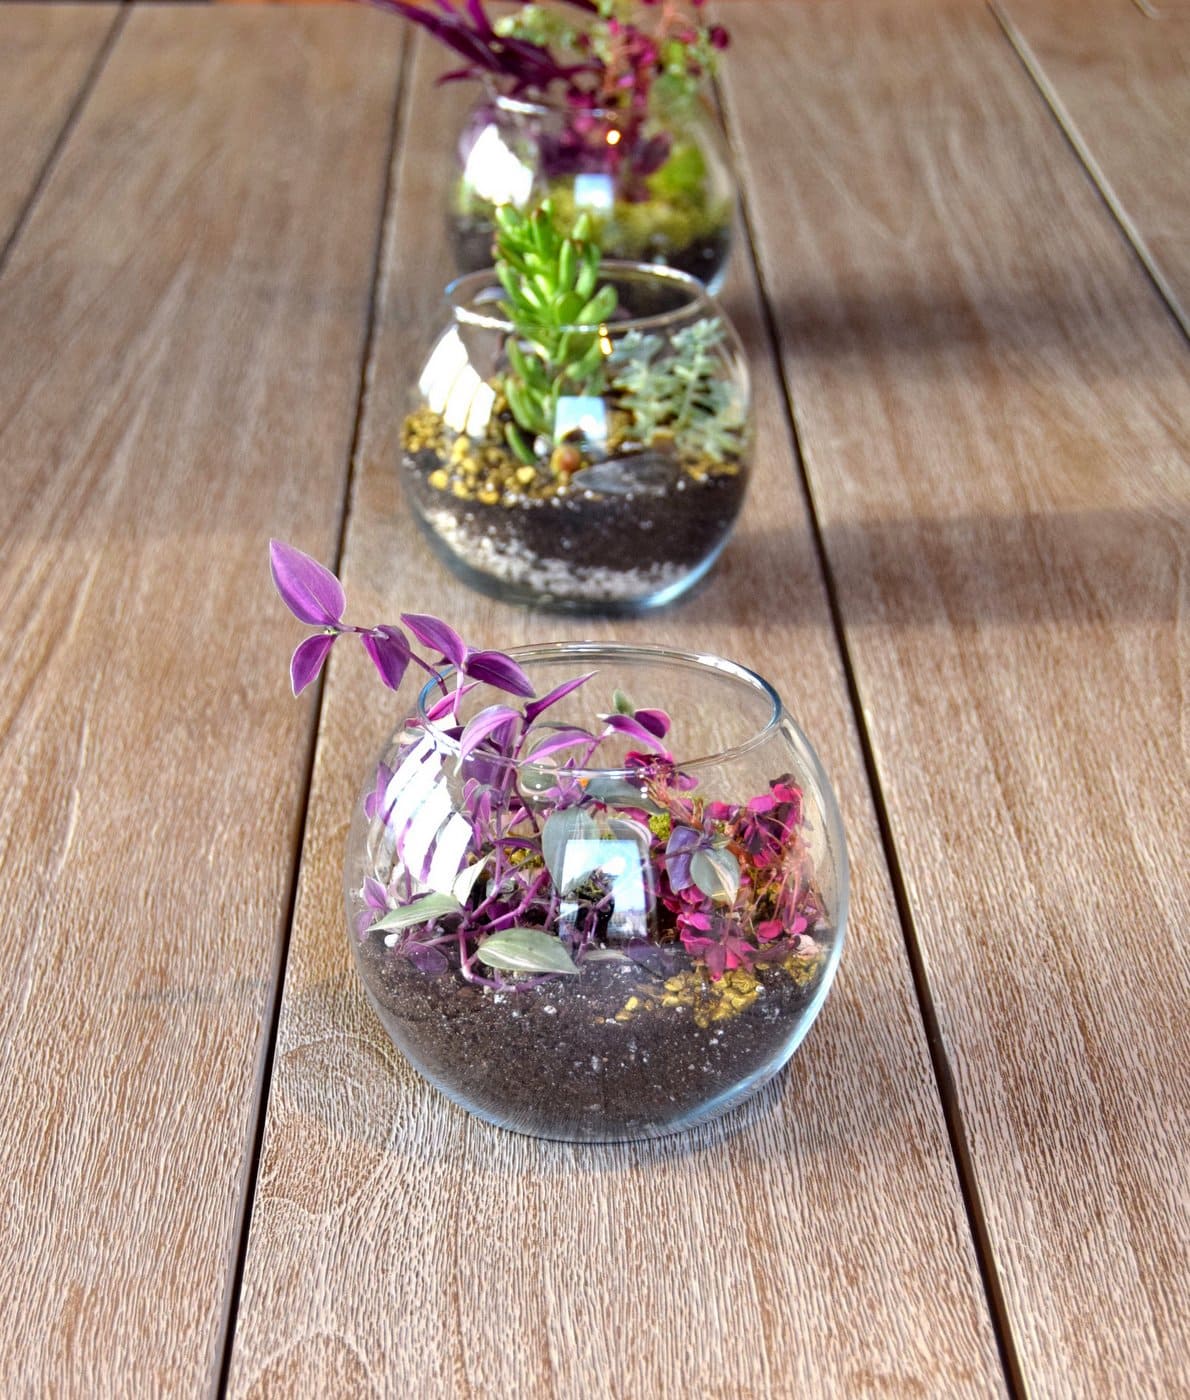 Indoor plants decorating: Three small pretty terrariums with plants of varying colors